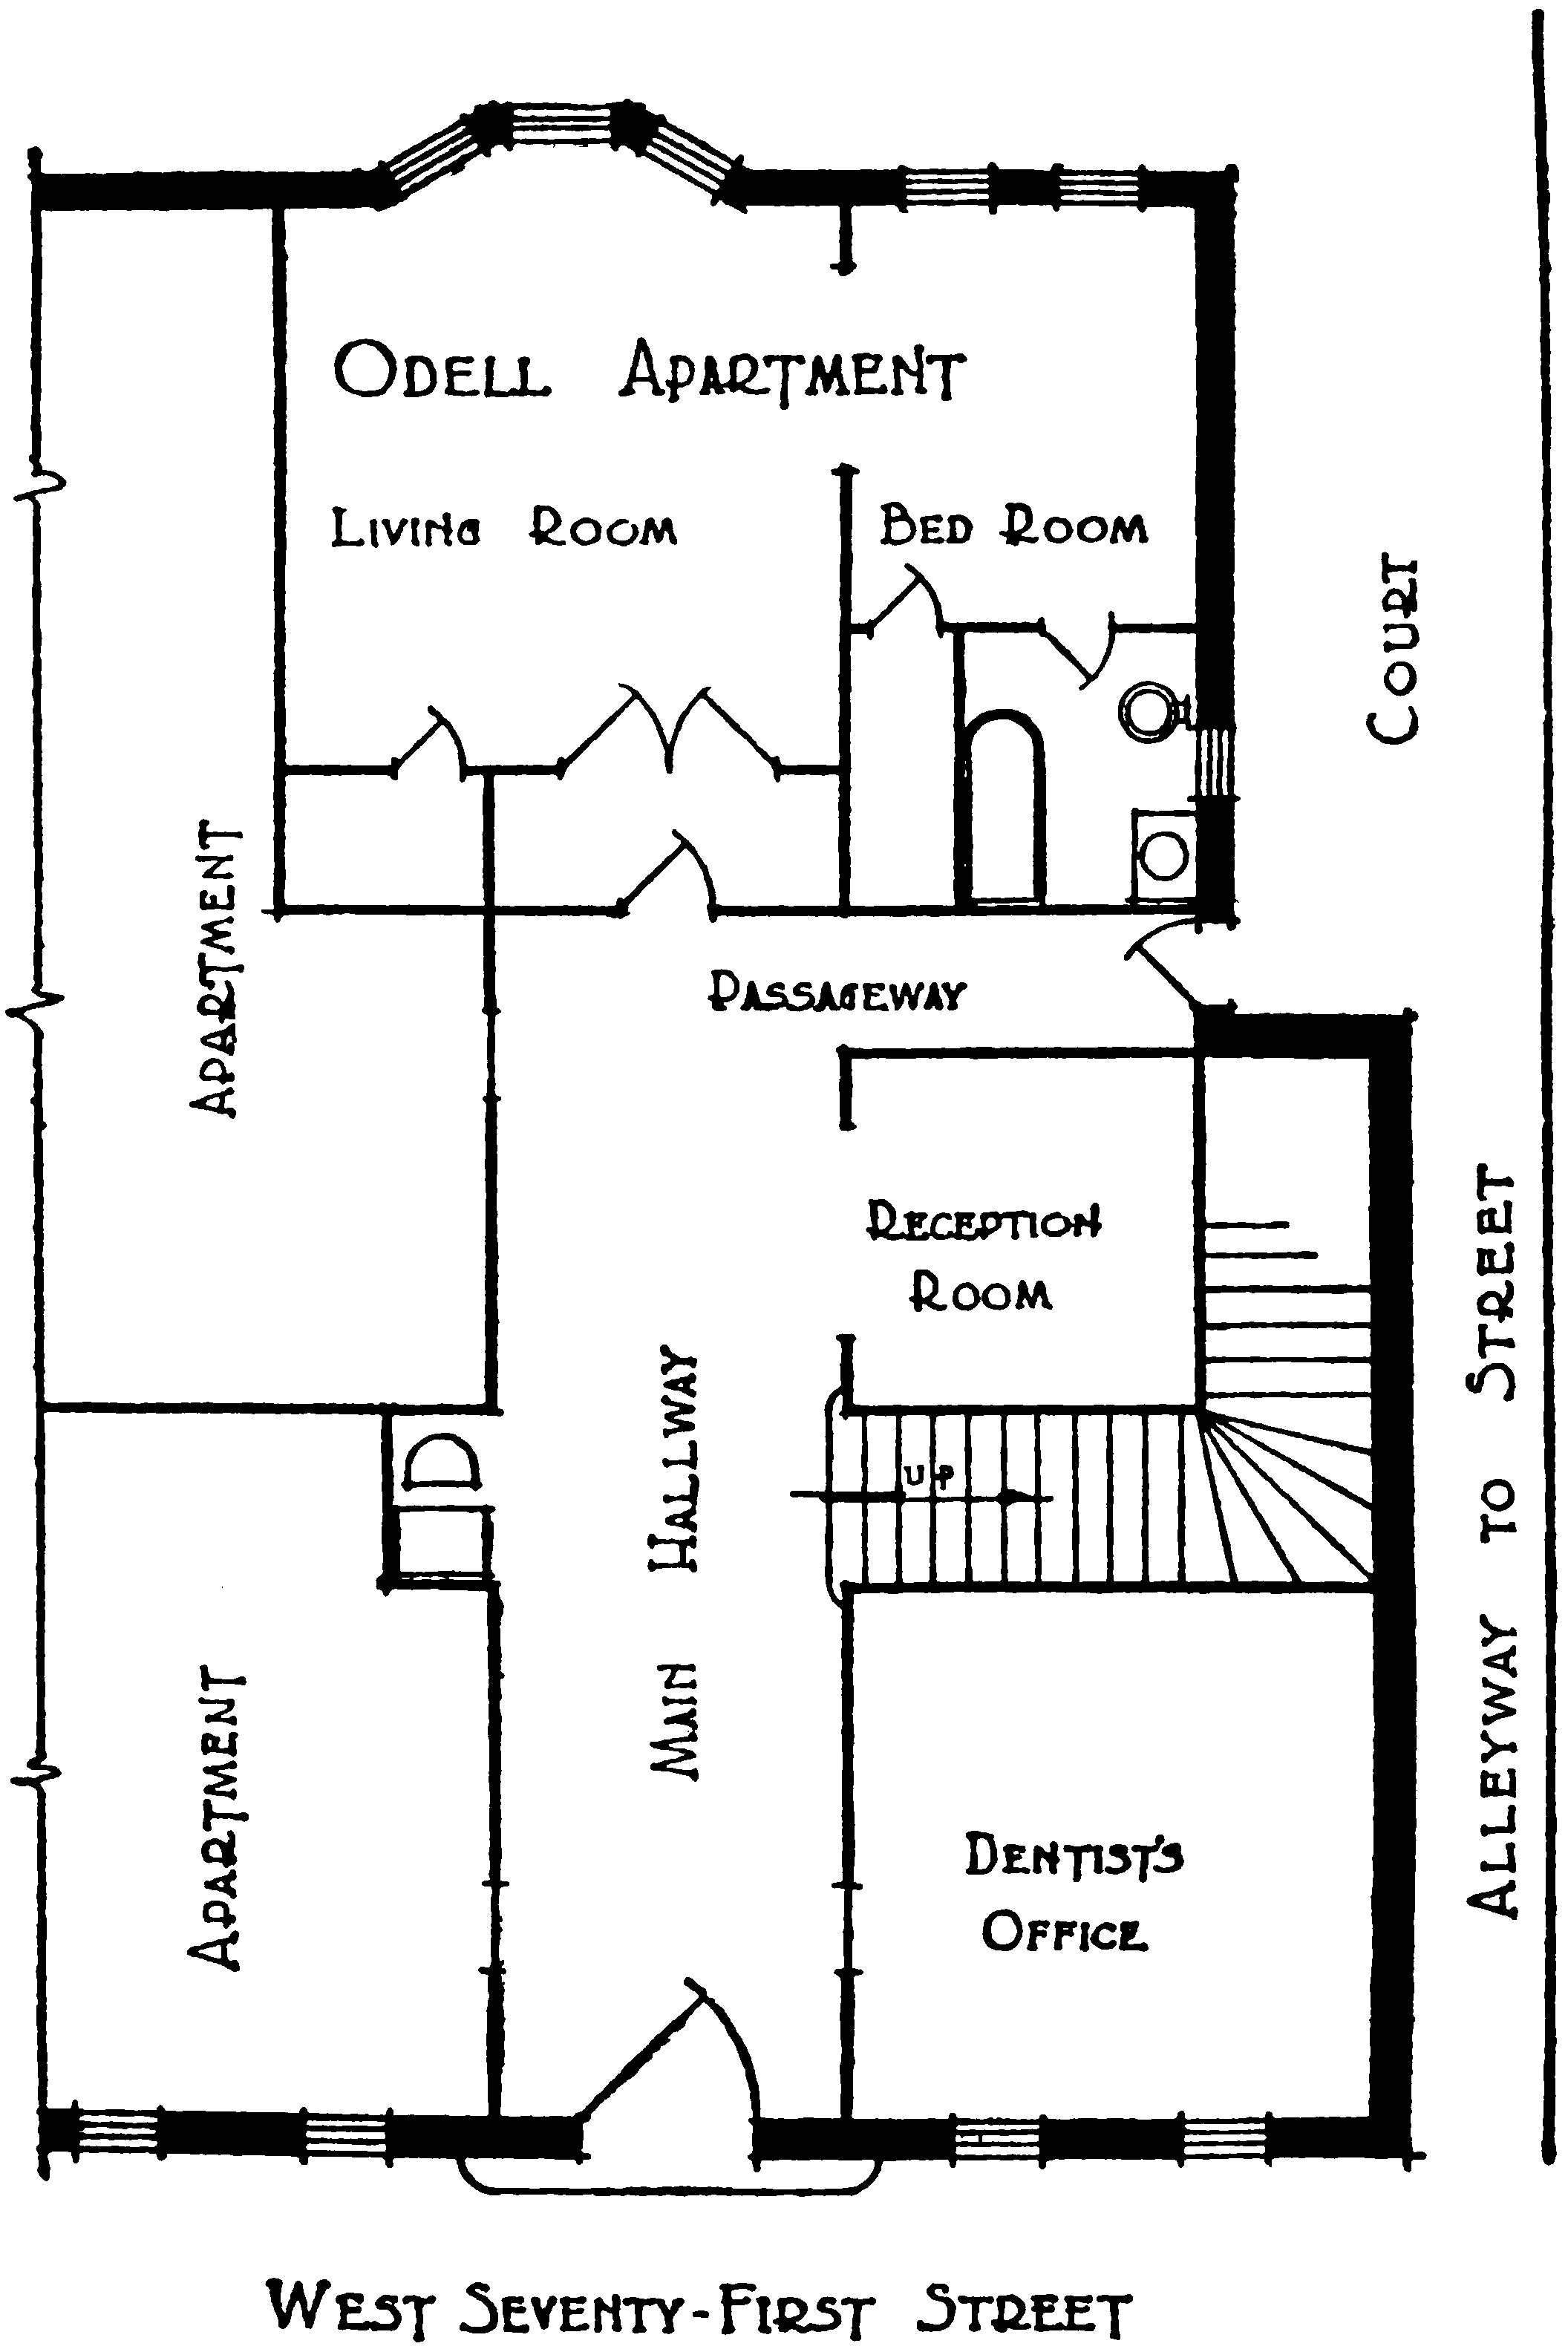 A ground-floor plan of an       apartment building. The front door is on the south side, and       faces West Seventy-First Street. It opens into the main hallway,       which runs north past a dentist’s office, a telephone       switchboard, stairs to the upper floors, a reception room, and       two apartments, before turning into a narrow passageway to the       east that ends in a side door leading to a court next to an       alleyway. At the juncture of this passageway and the main       hallway is the door to a large apartment labeled “Odell       Apartment”.